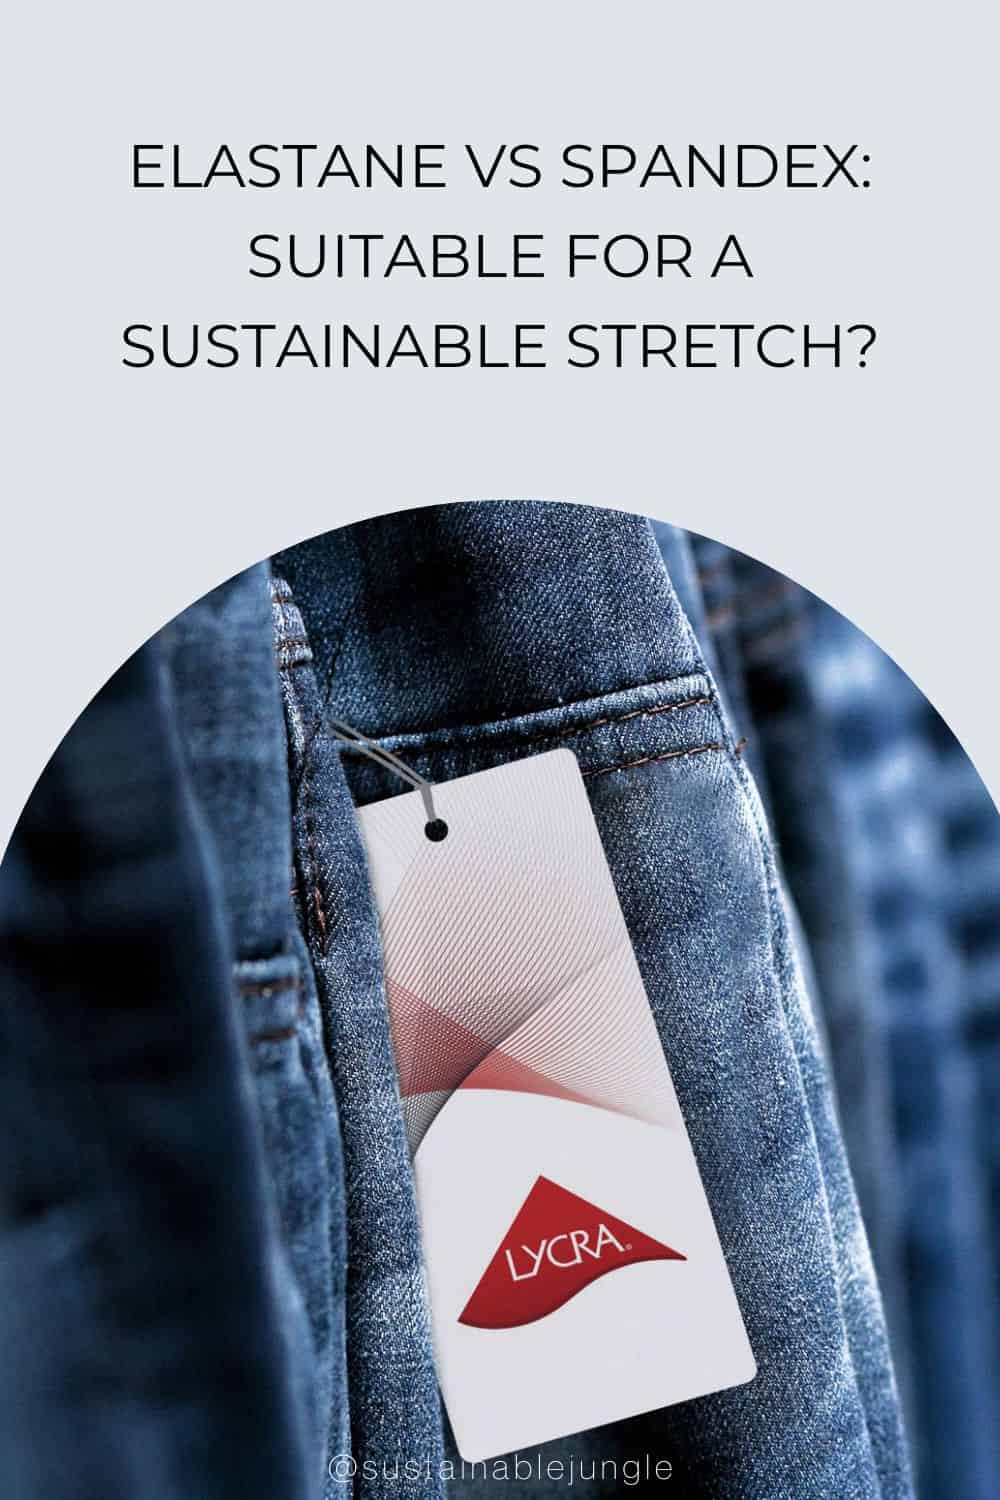 Elastane vs Spandex: Suitable For A Sustainable Stretch?